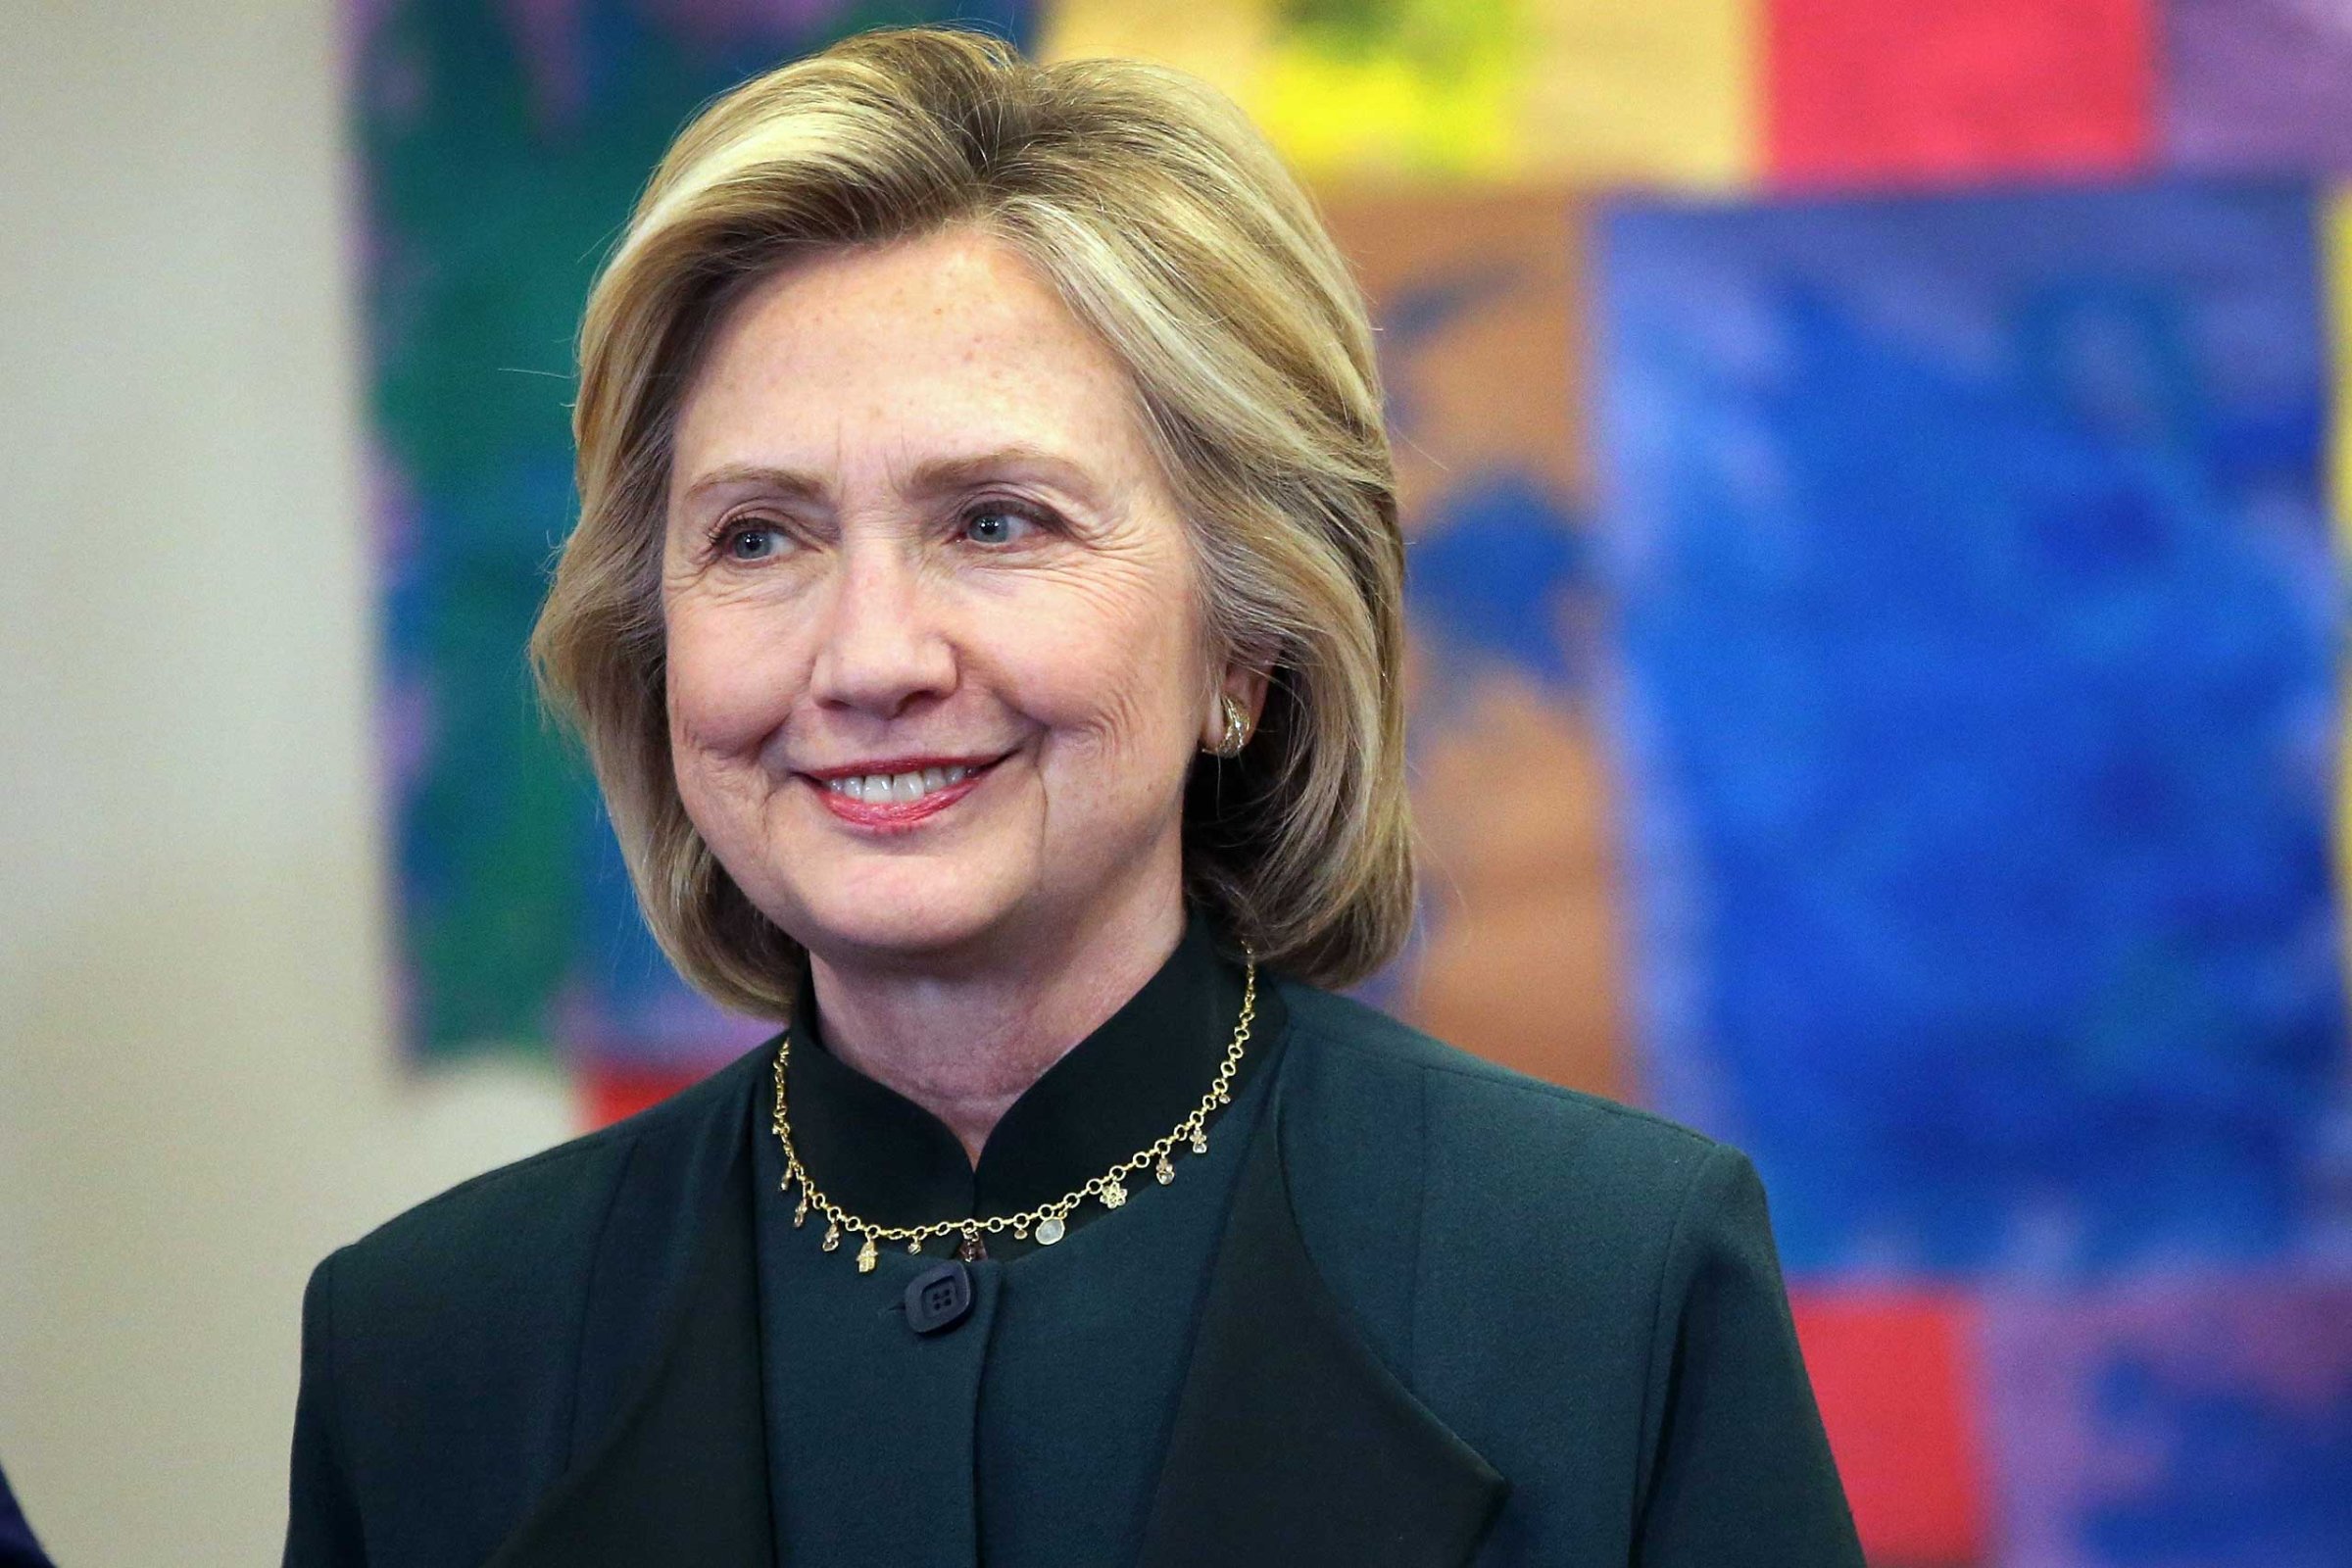 Democratic presidential hopeful and former Secretary of State Hillary Clinton arrives for a meeting with parents and child care workers at the Center for New Horizons in Chicago on May 20, 2015.